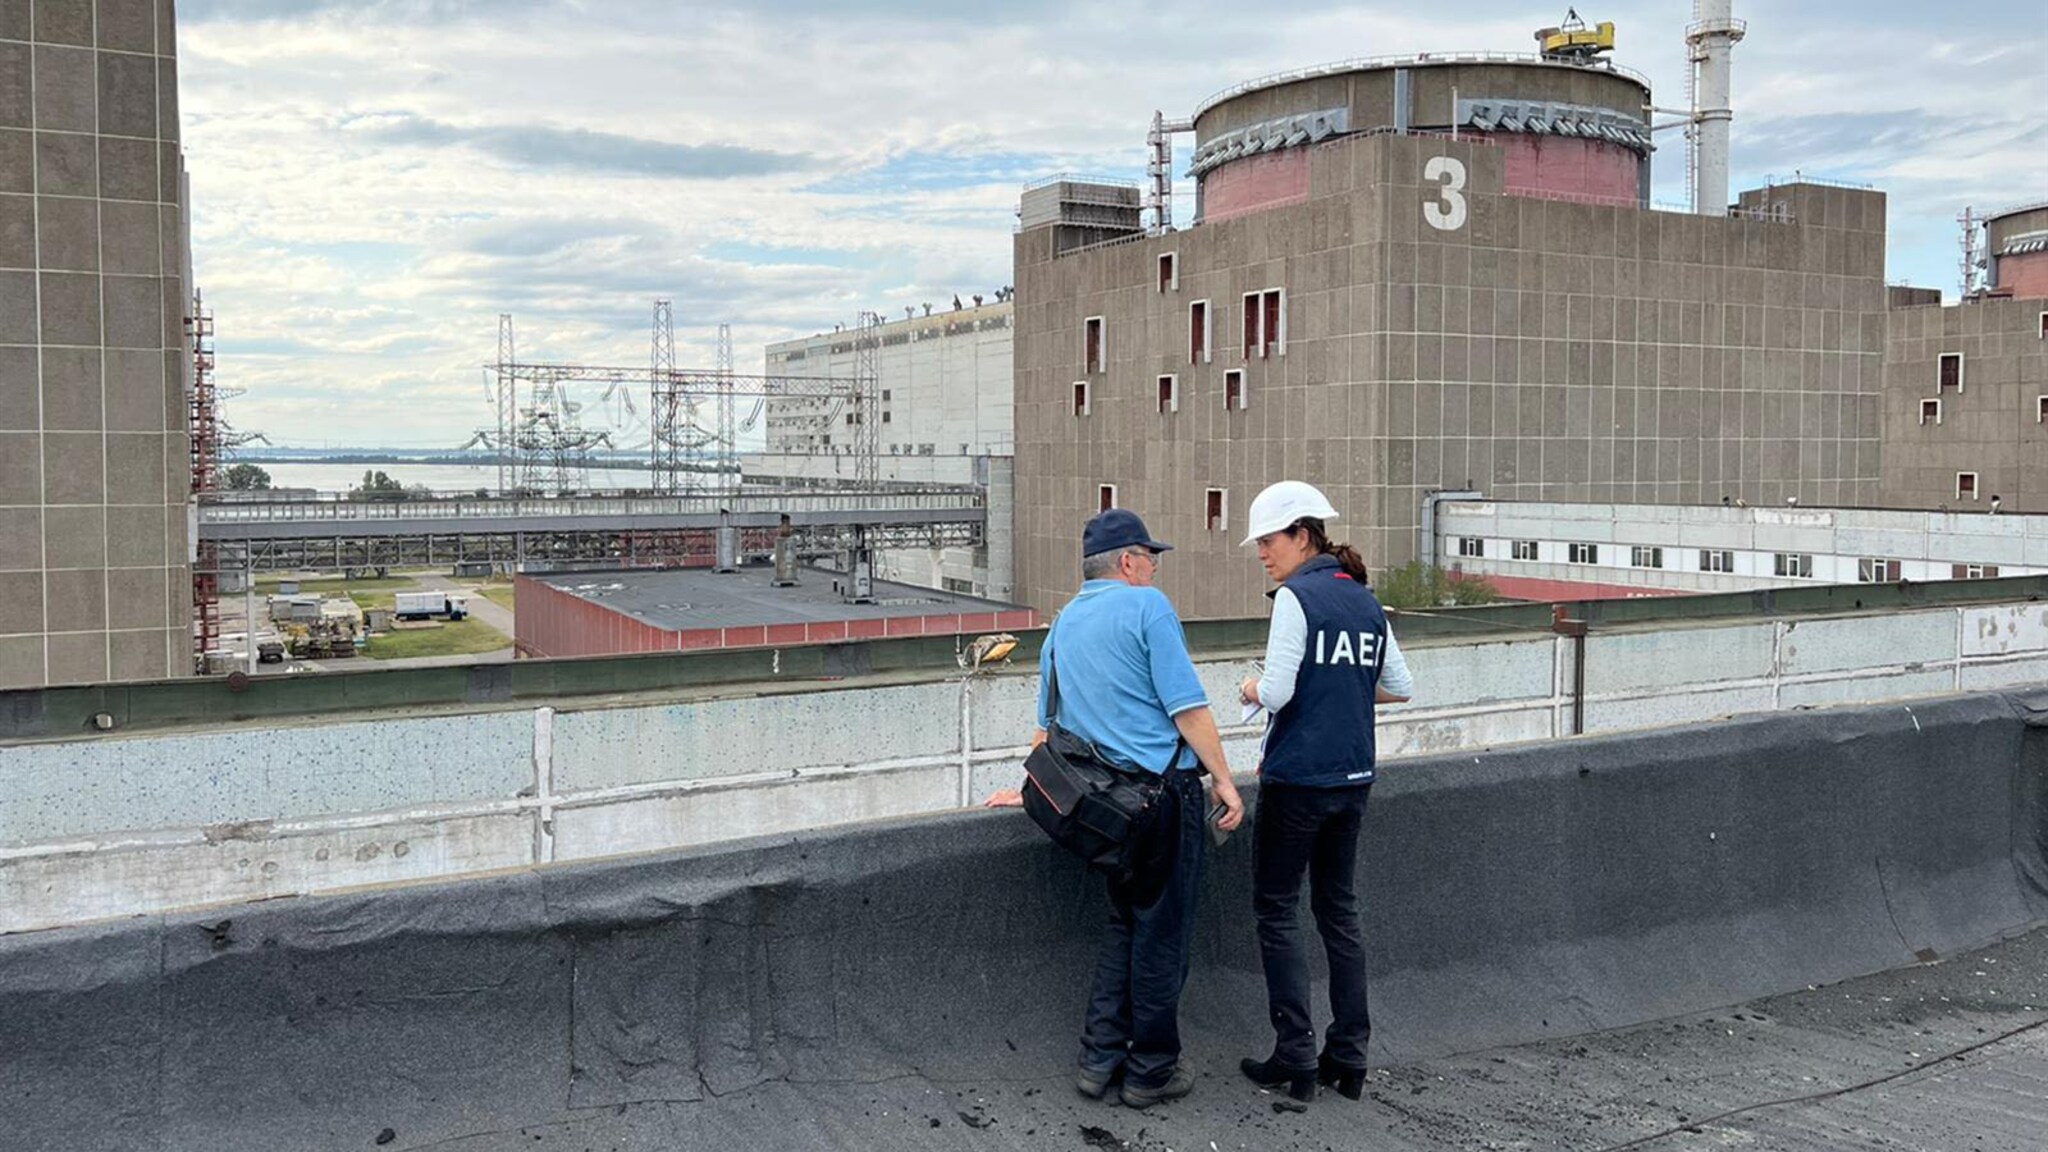 Zaporizhzhya nuclear power plant is no longer connected to the power grid